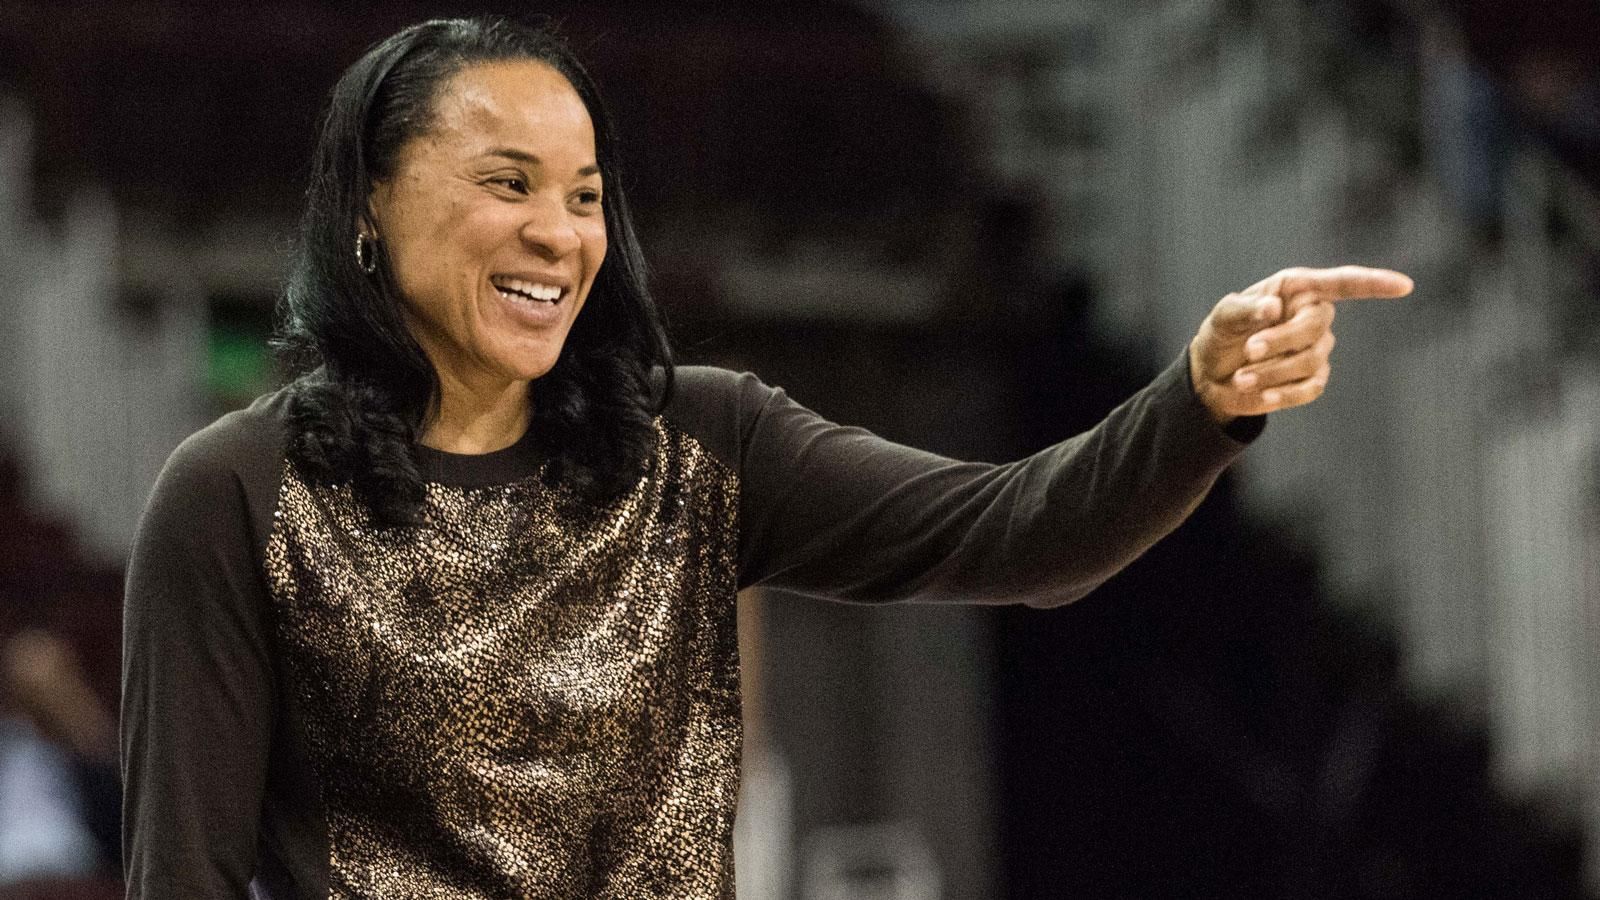 Postgame Interview: South Carolina coach Dawn Staley